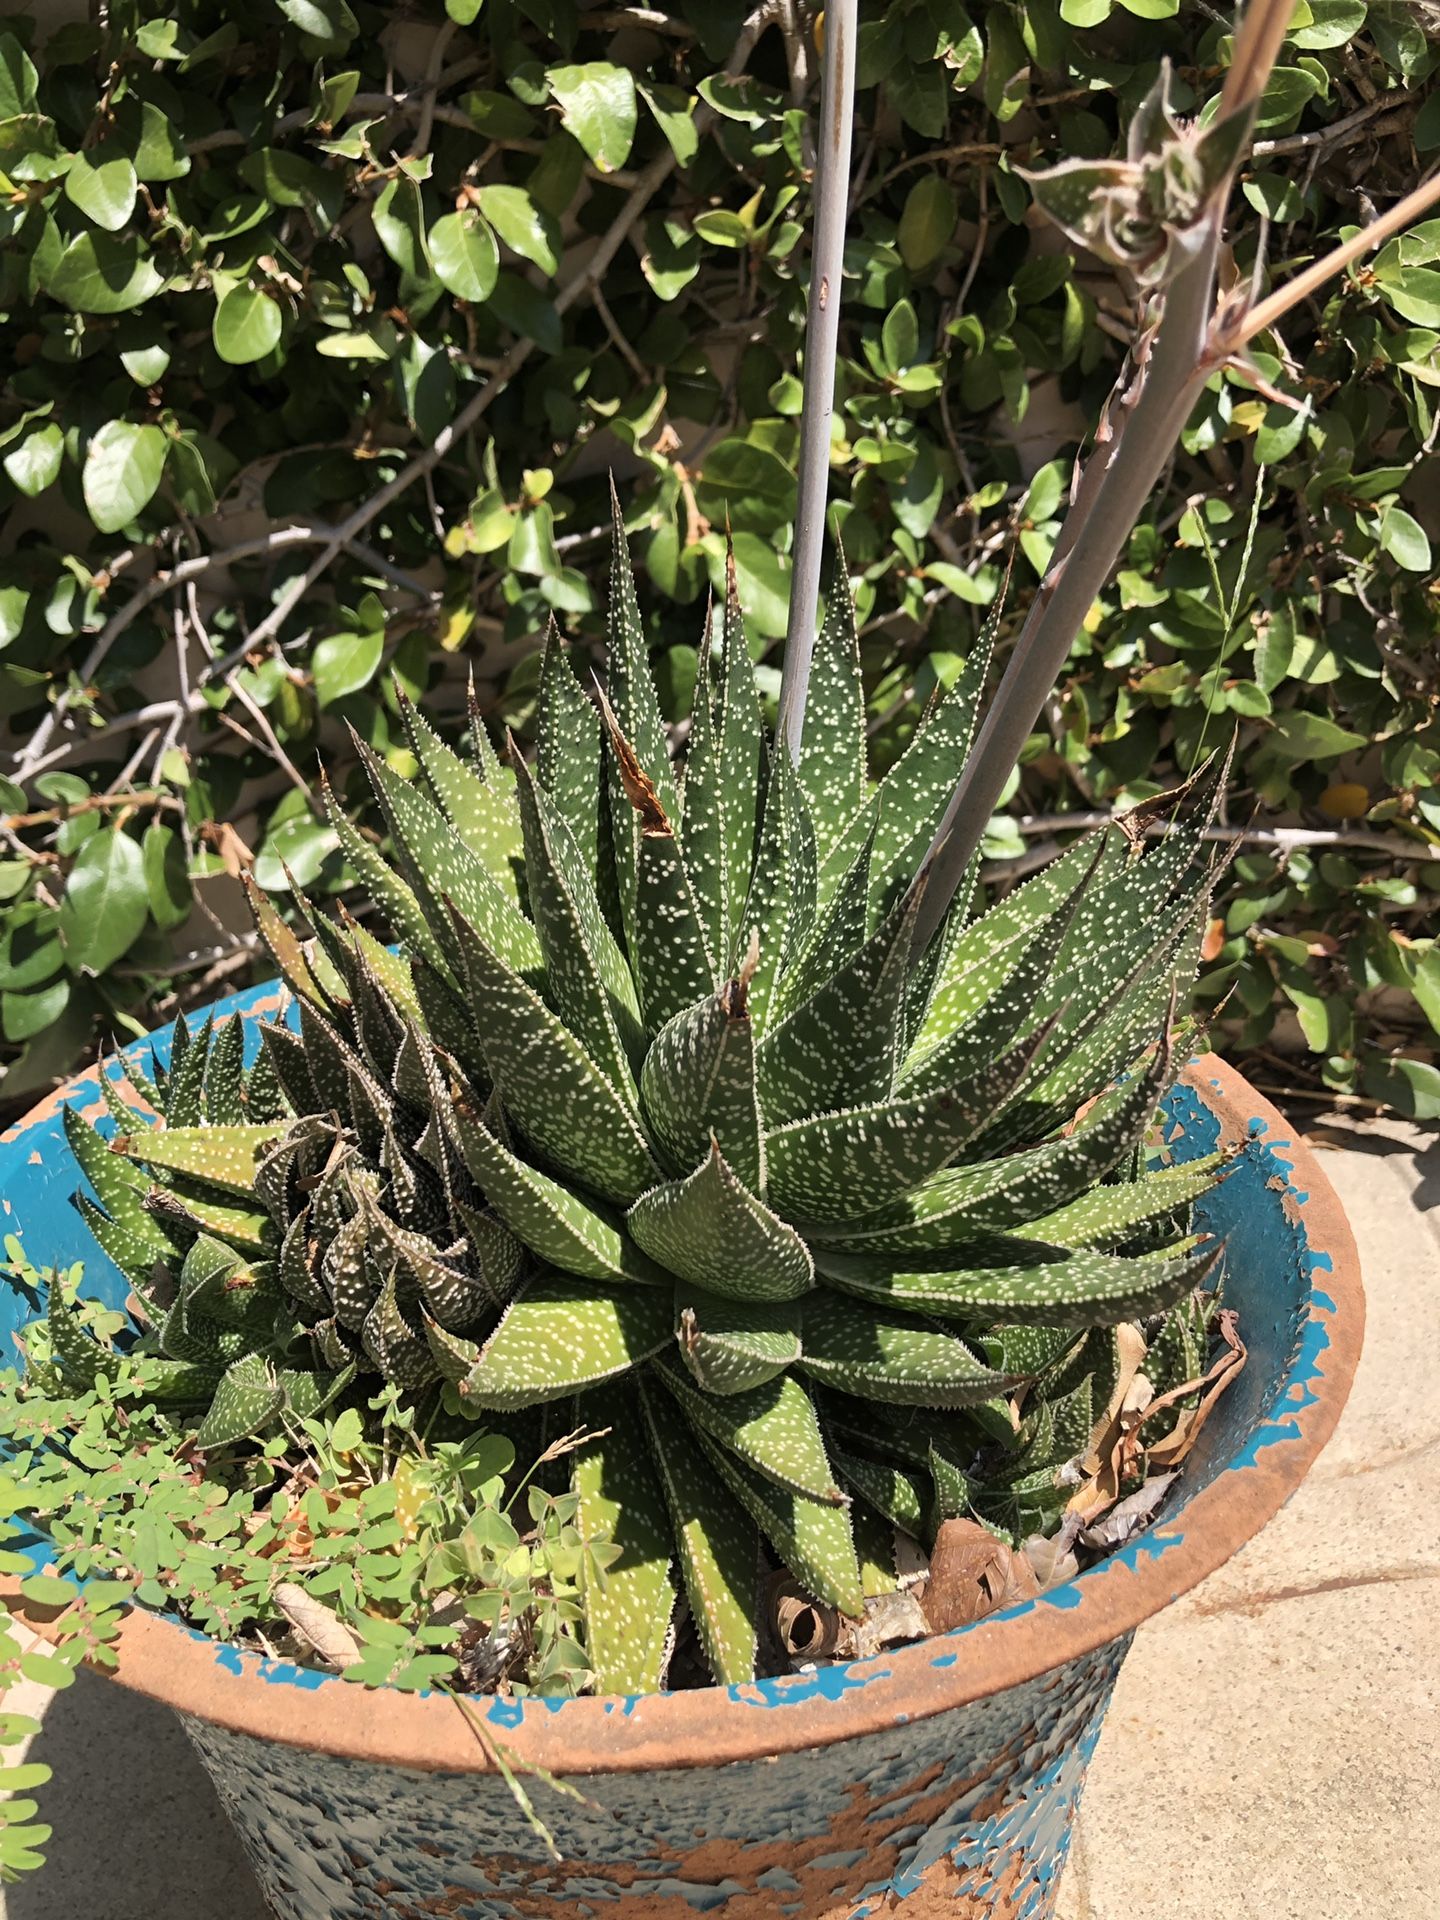 Potted cactus - approx 3’